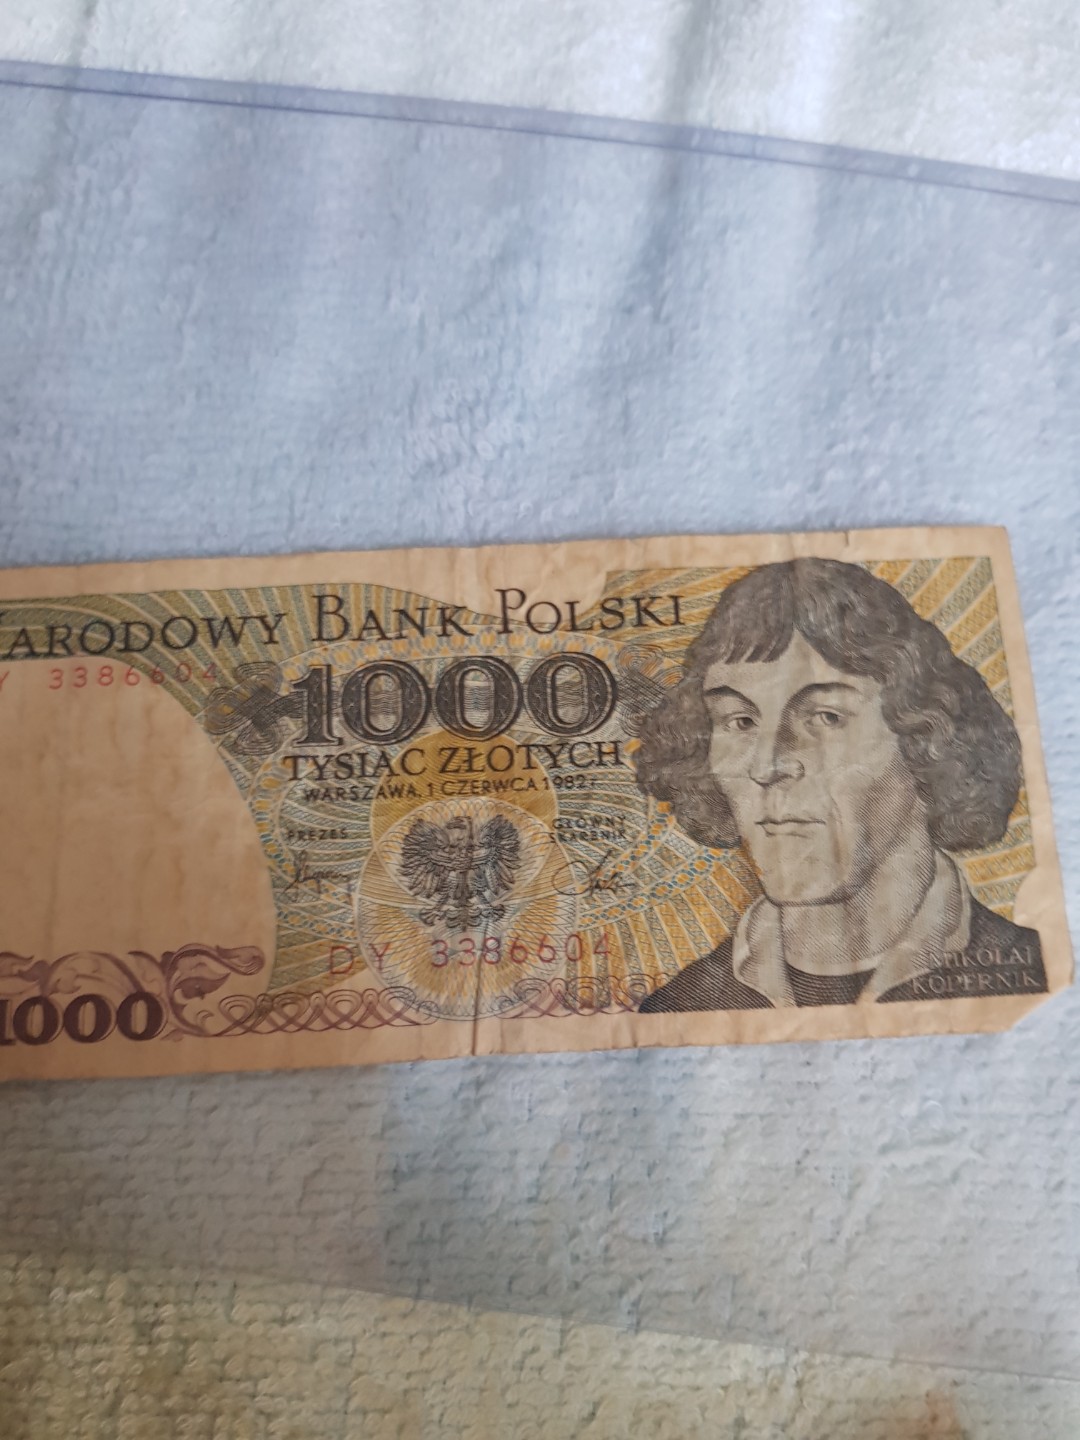 1000 Zlotych Banknote Issued By Narodowy Bank Polski Featuring